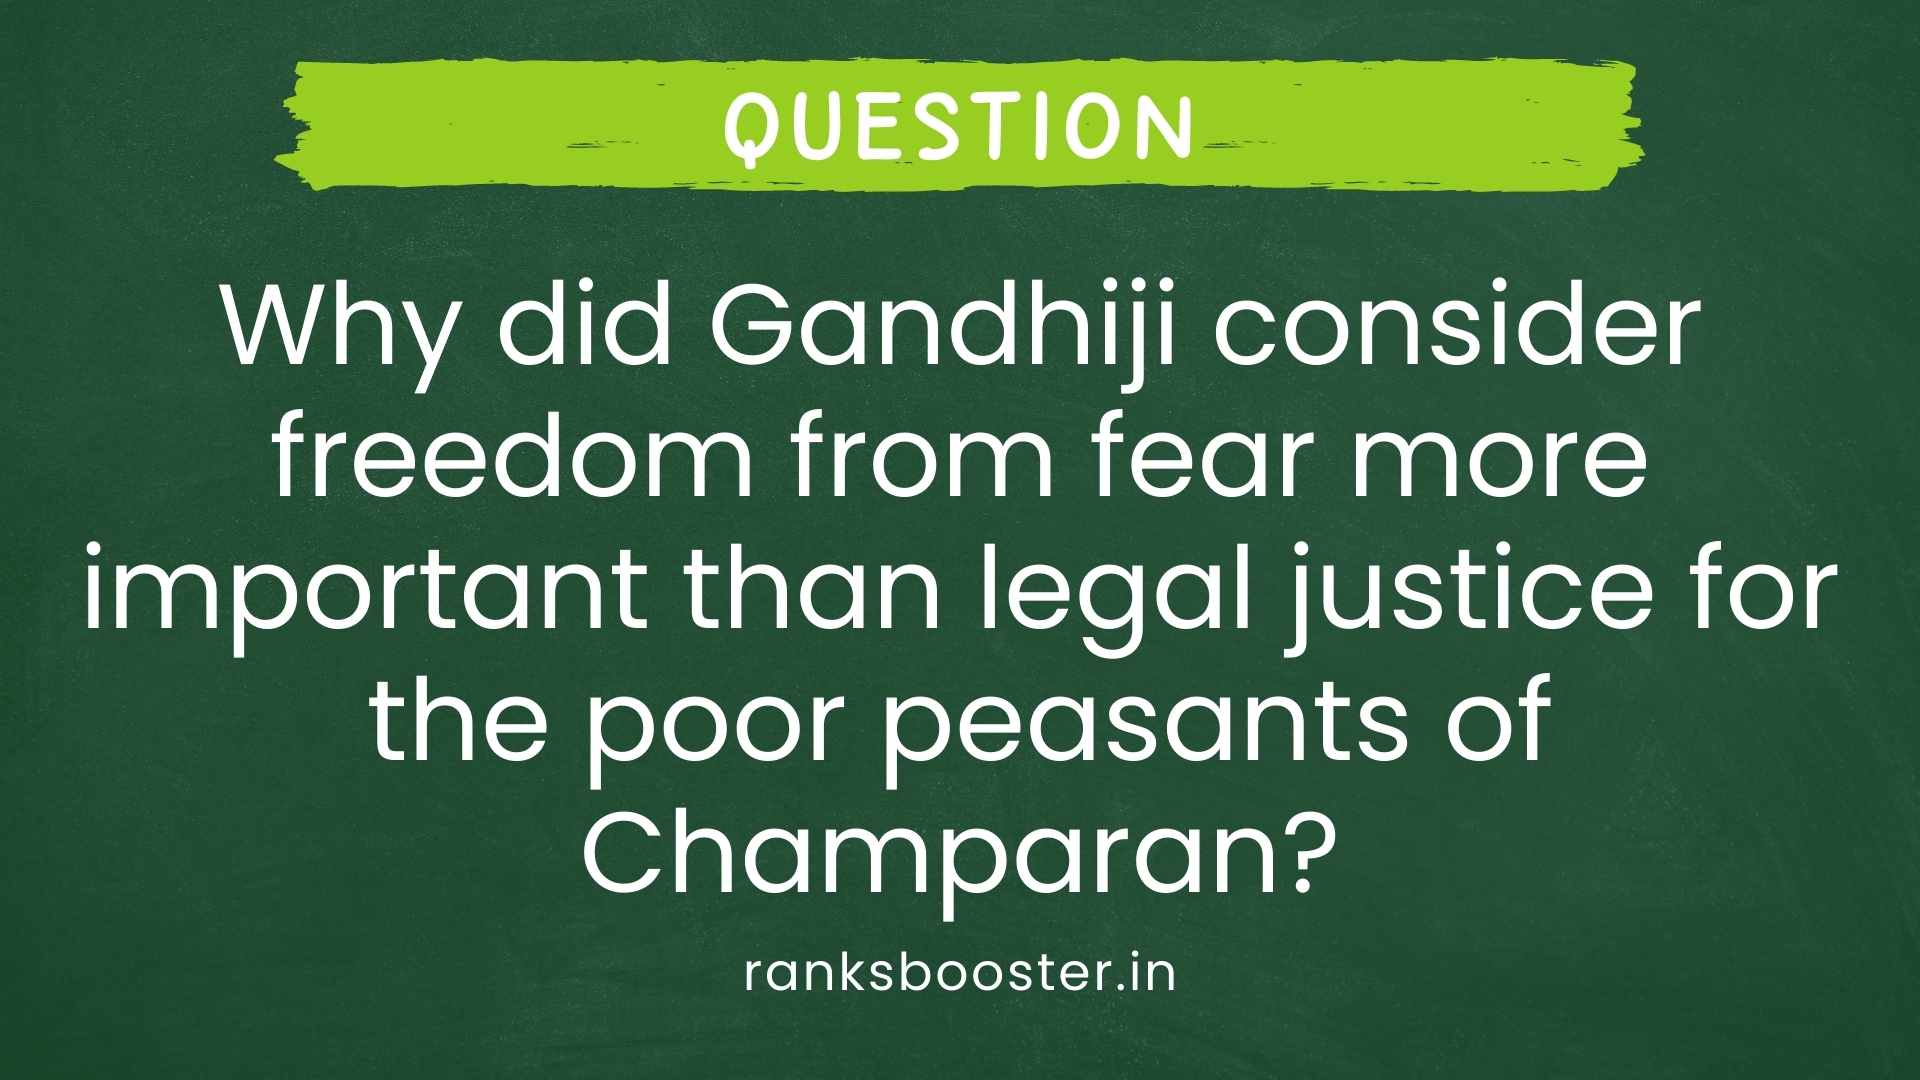 Question: Why did Gandhiji consider freedom from fear more important than legal justice for the poor peasants of Champaran? [CBSE Sample Paper 2016]